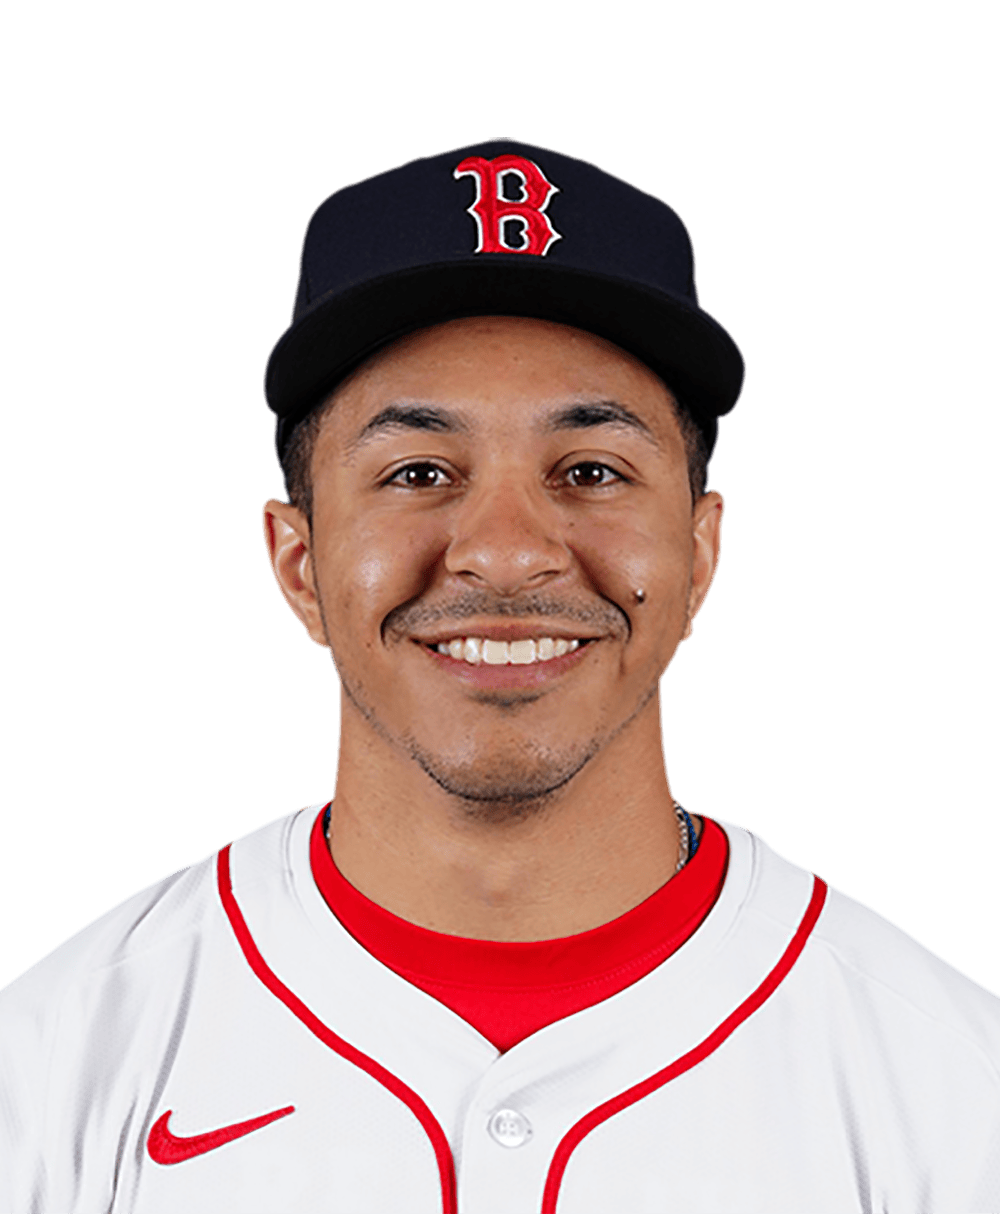 Red Sox show off organizational depth by bringing up pair of top